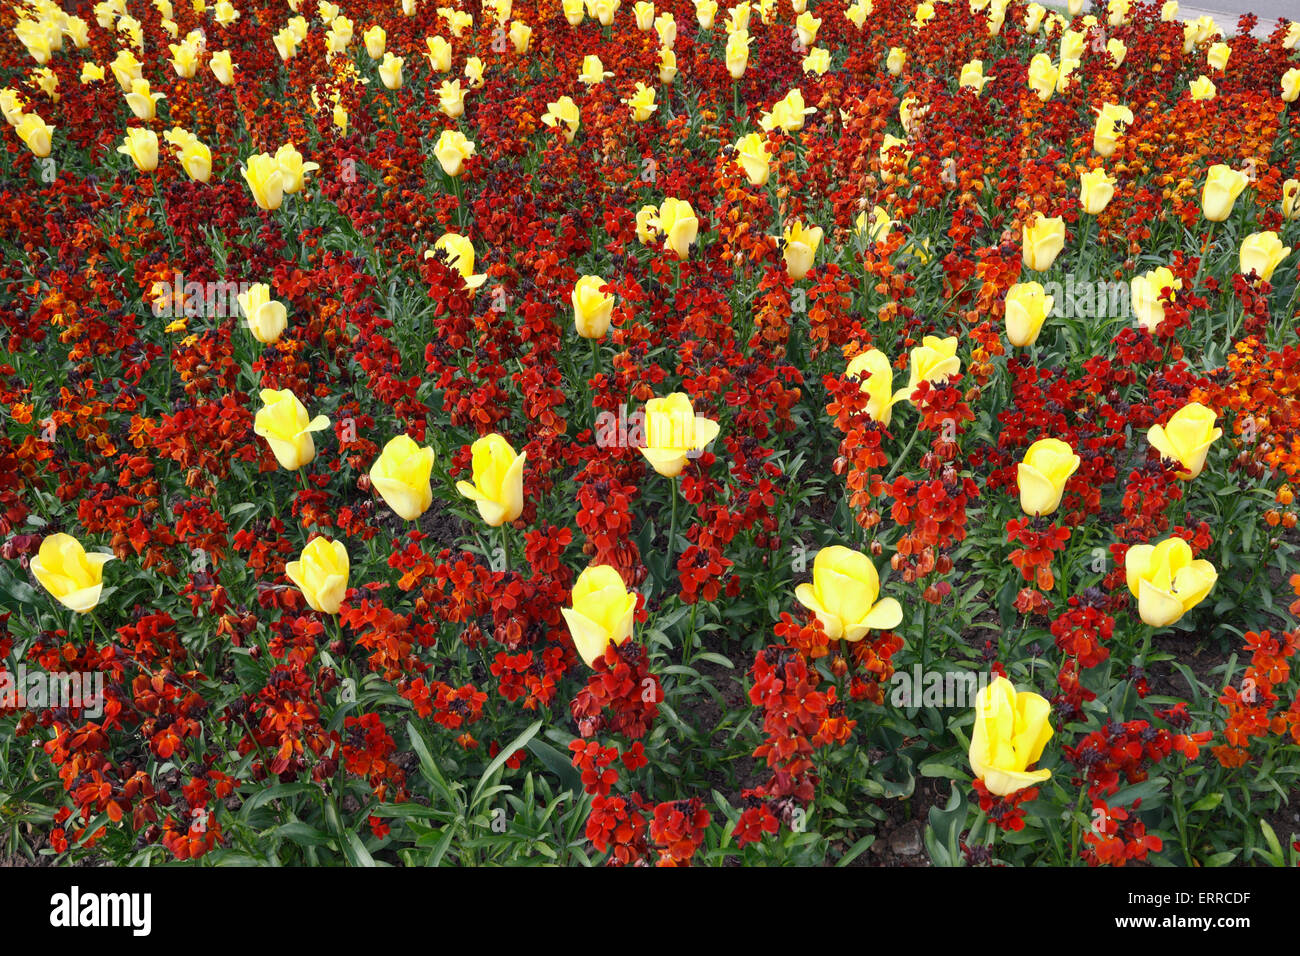 Ornamental Garden feature with Daffodils and Wallflowers Stock Photo